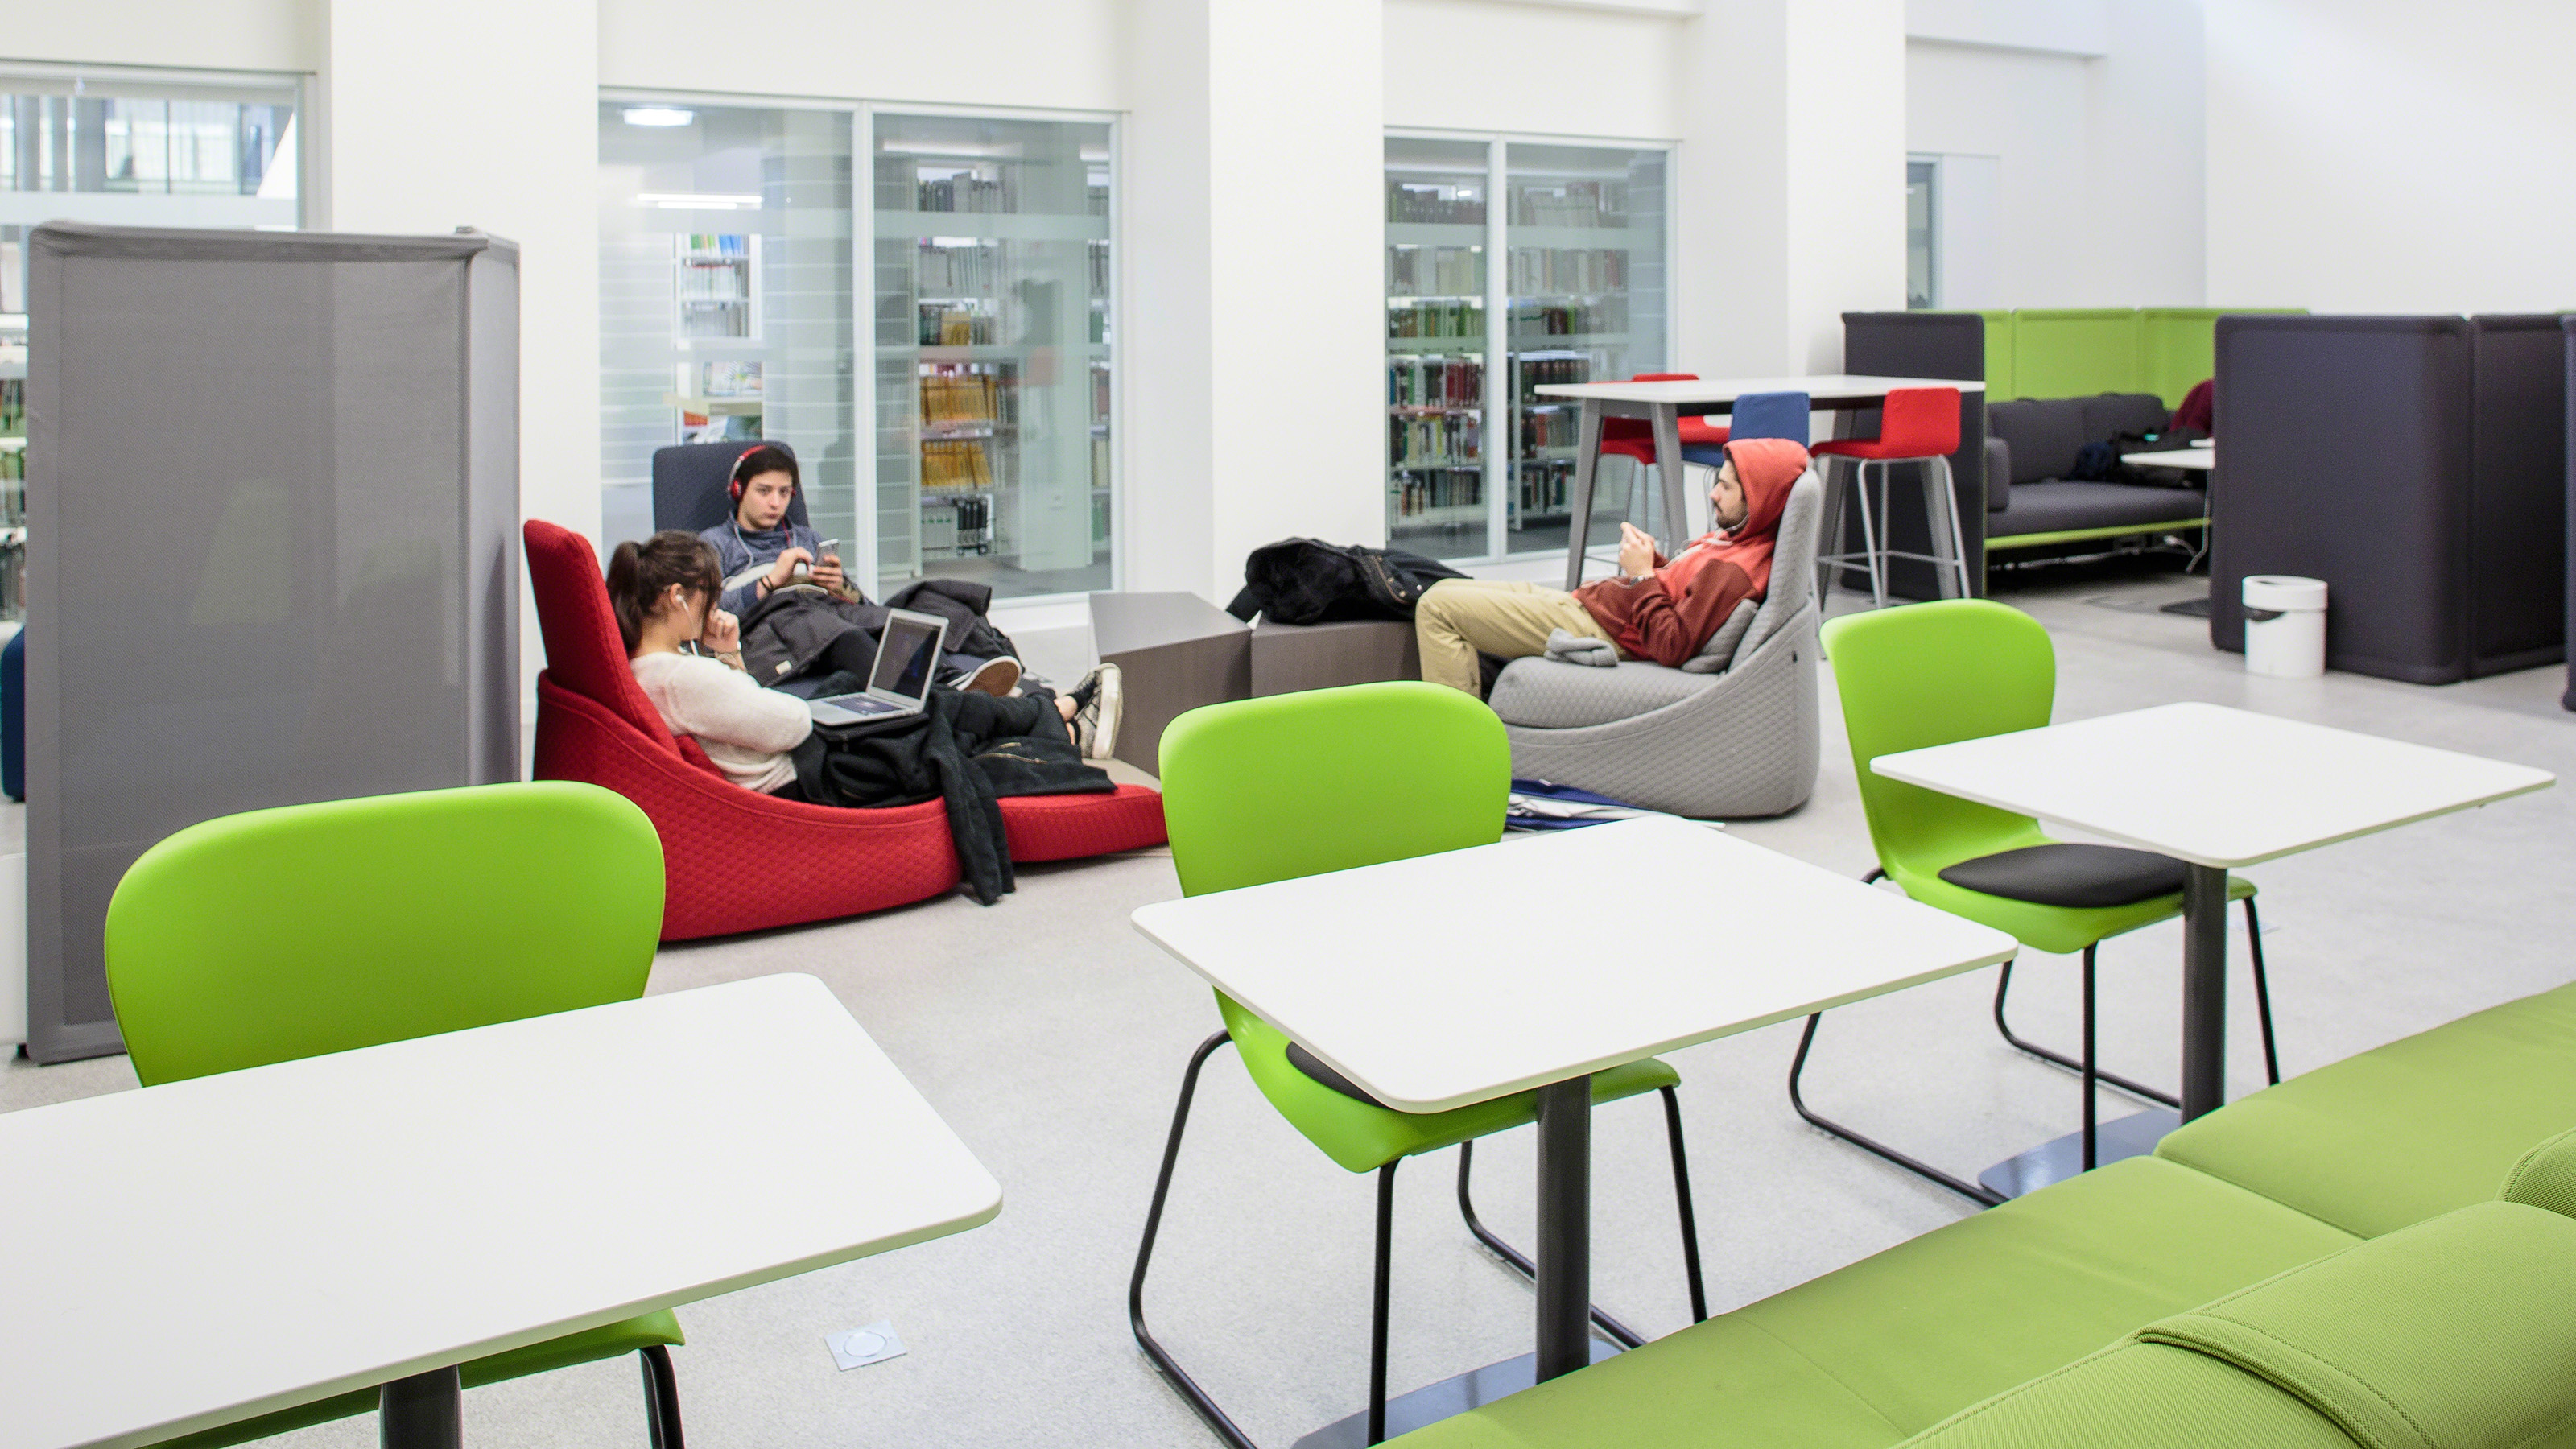 The Pierre and Marie Curie University library renovation in Paris found a way to inspire collaboration without losing focus. Photos must courtesy: Alexis Narodtezky, Steelcase Education